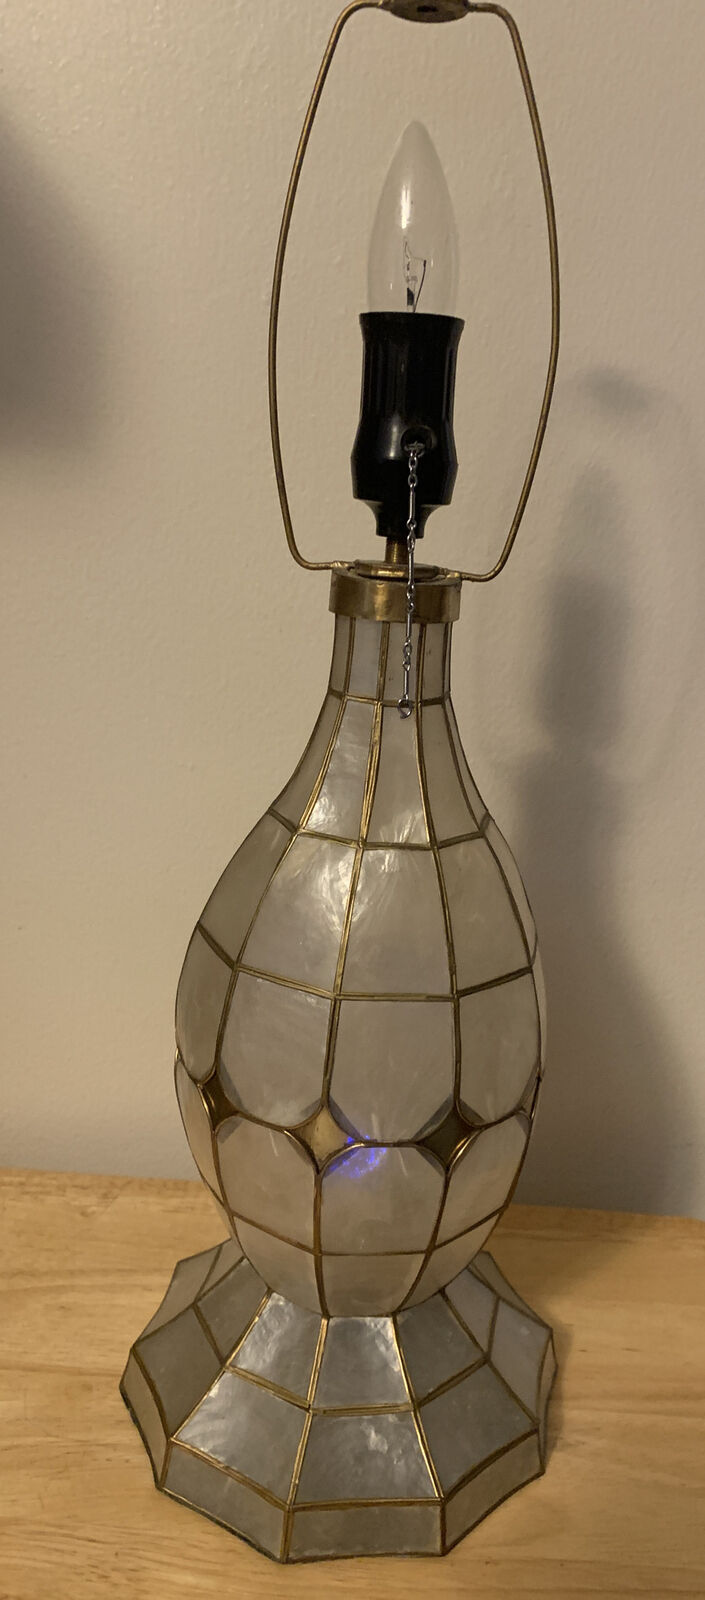 Vintage Capiz Shell Table Lamp Gold Brass Unique 21” Tall No Shade Tested